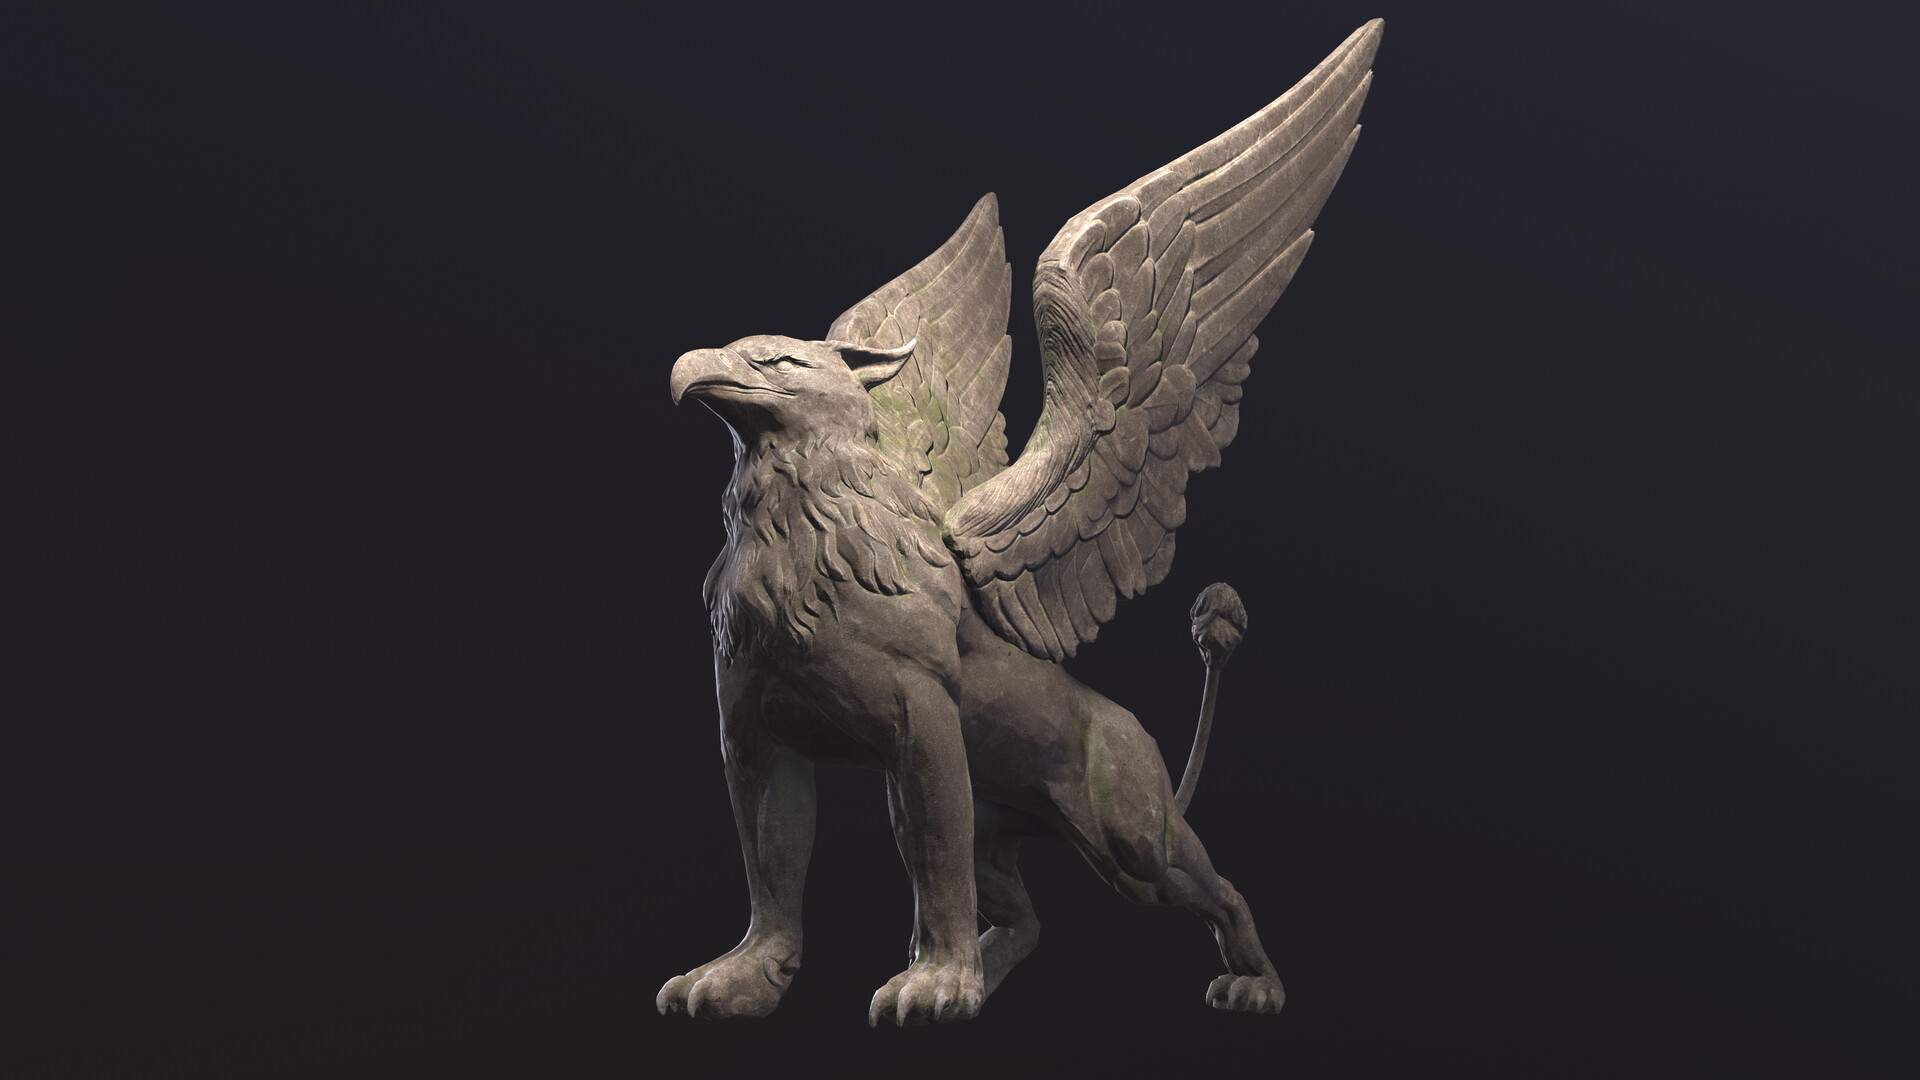 A Griffin